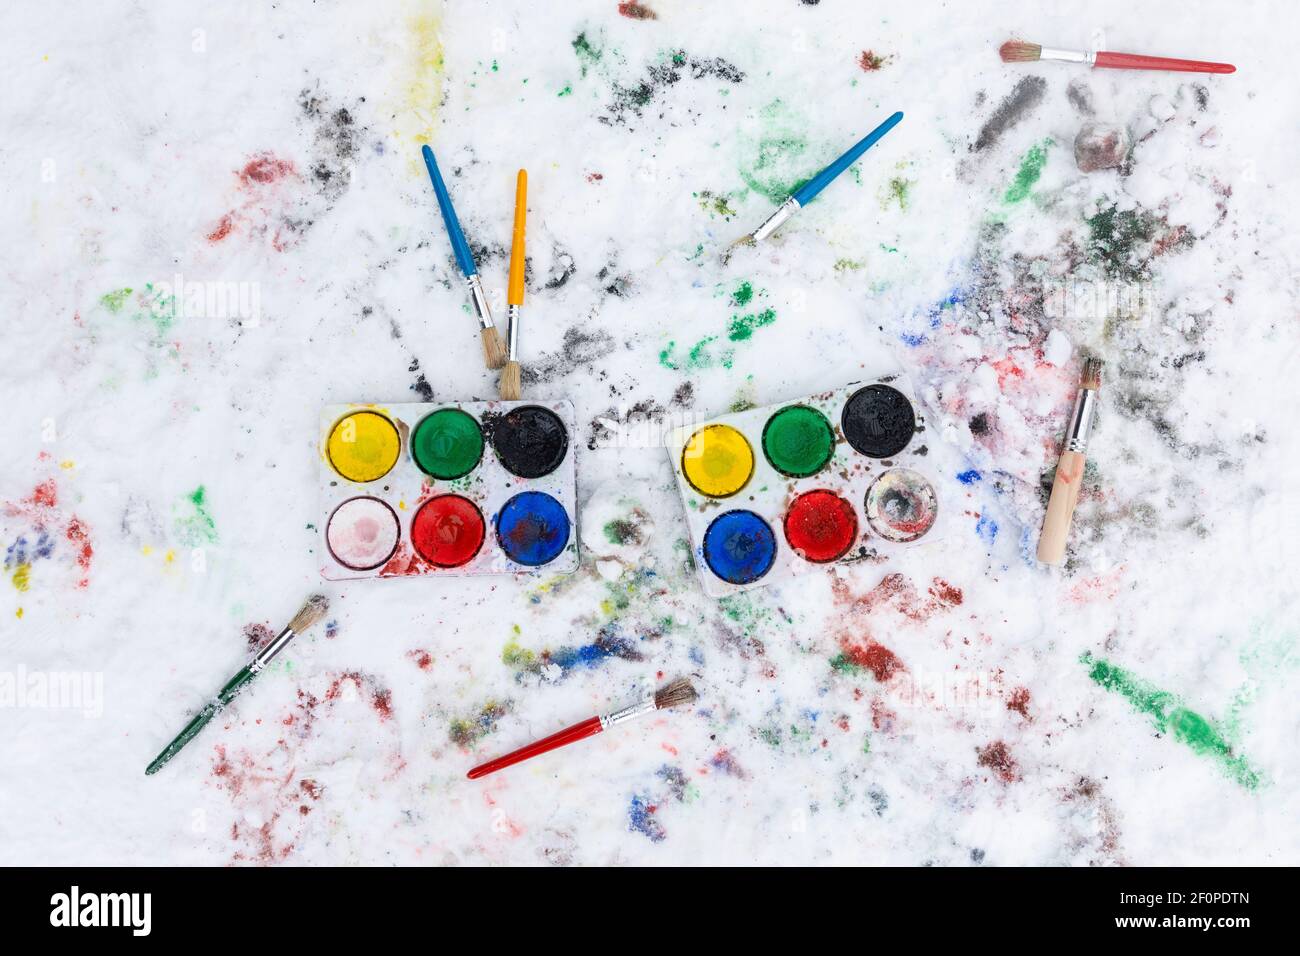 Watercolor painting on snow outdoors. Two water color paint boxes and scattered paint brushes seen from above. There is paint on the snow. Outdoors fu Stock Photo